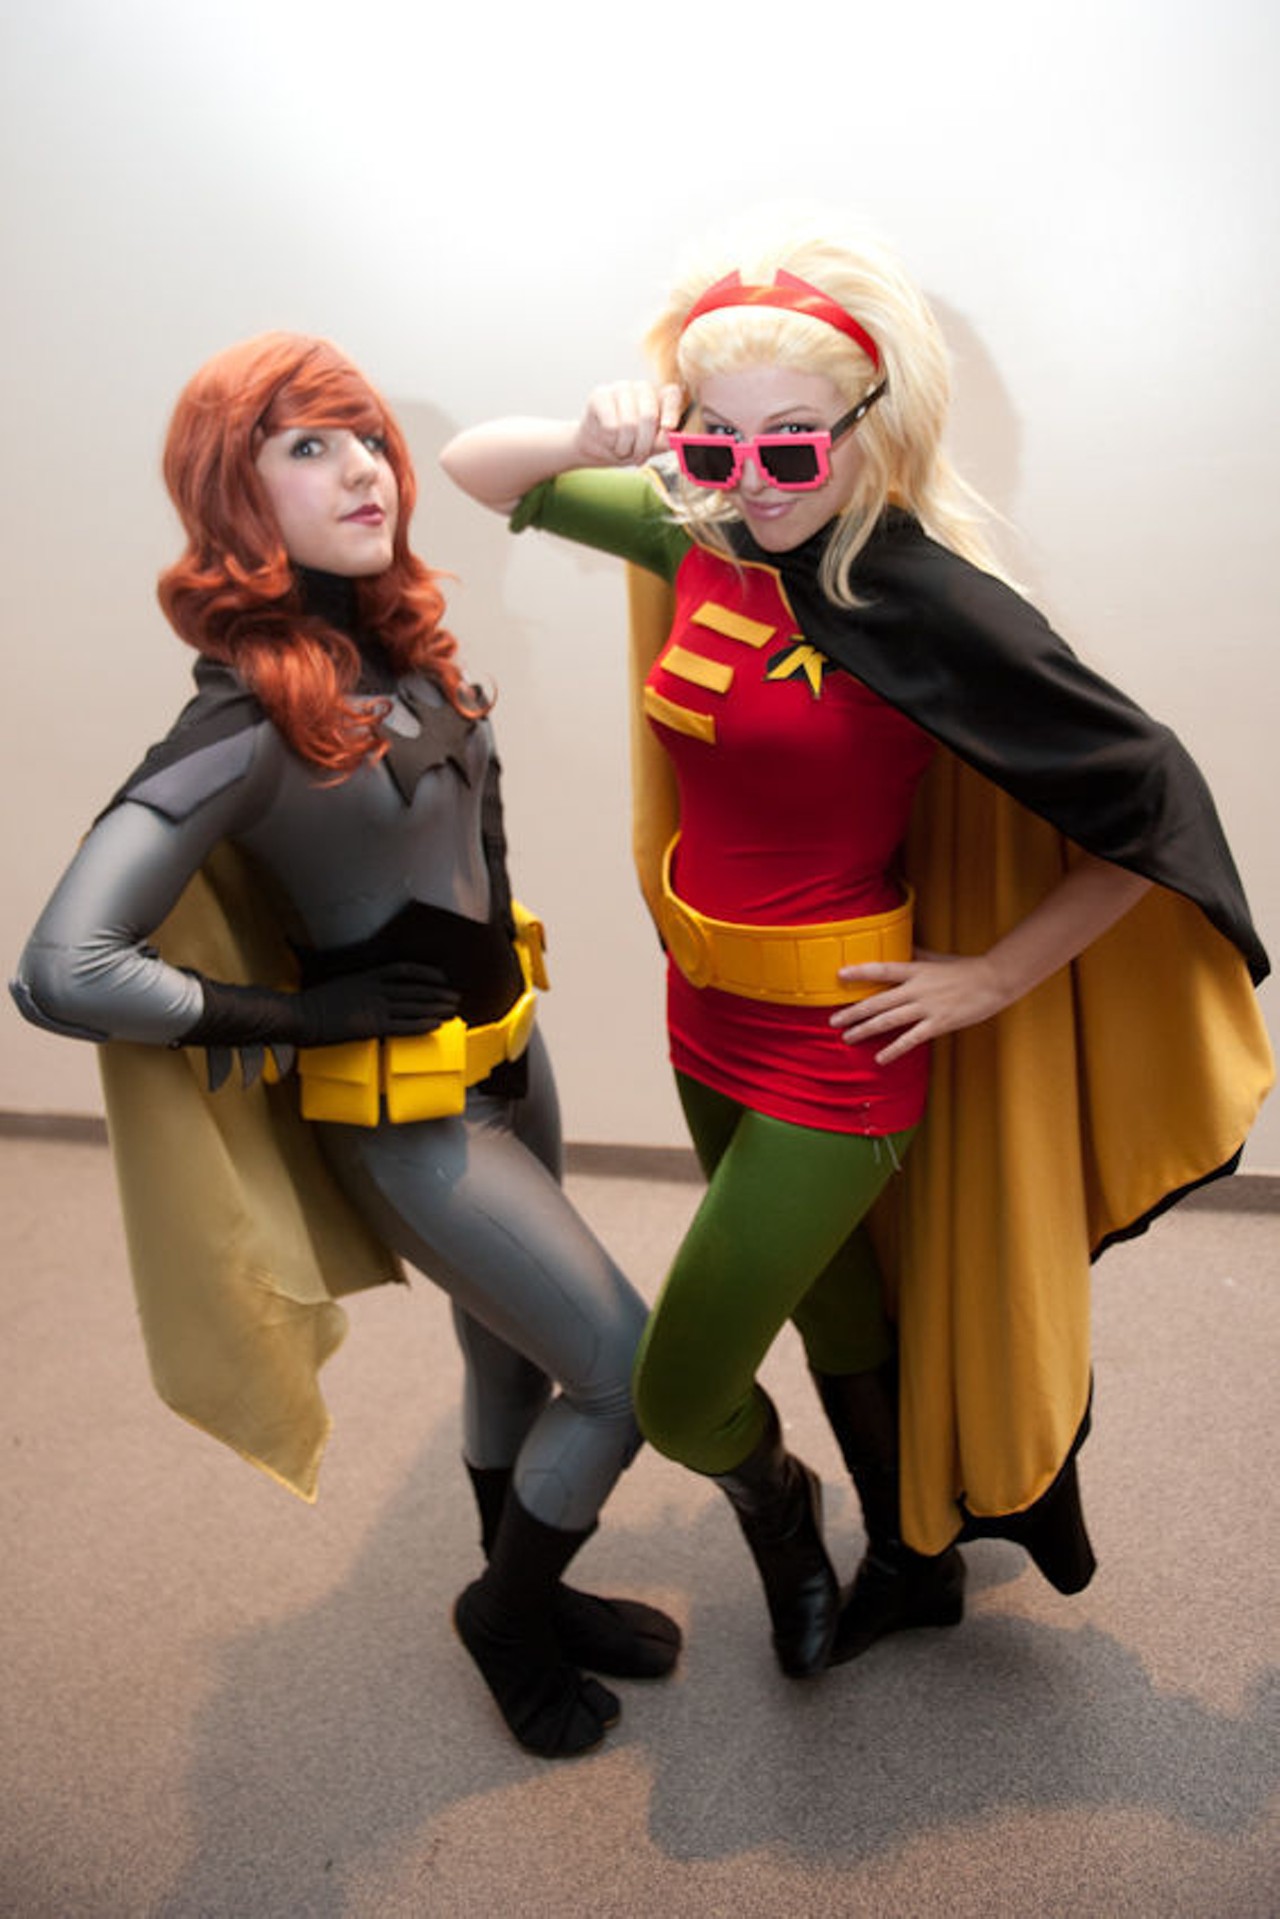 The Anime STL convention was held at the Gateway Center in Collinsville, Ill. April 12-14. See more photos of the 50 Best Costumes of Anime STL.